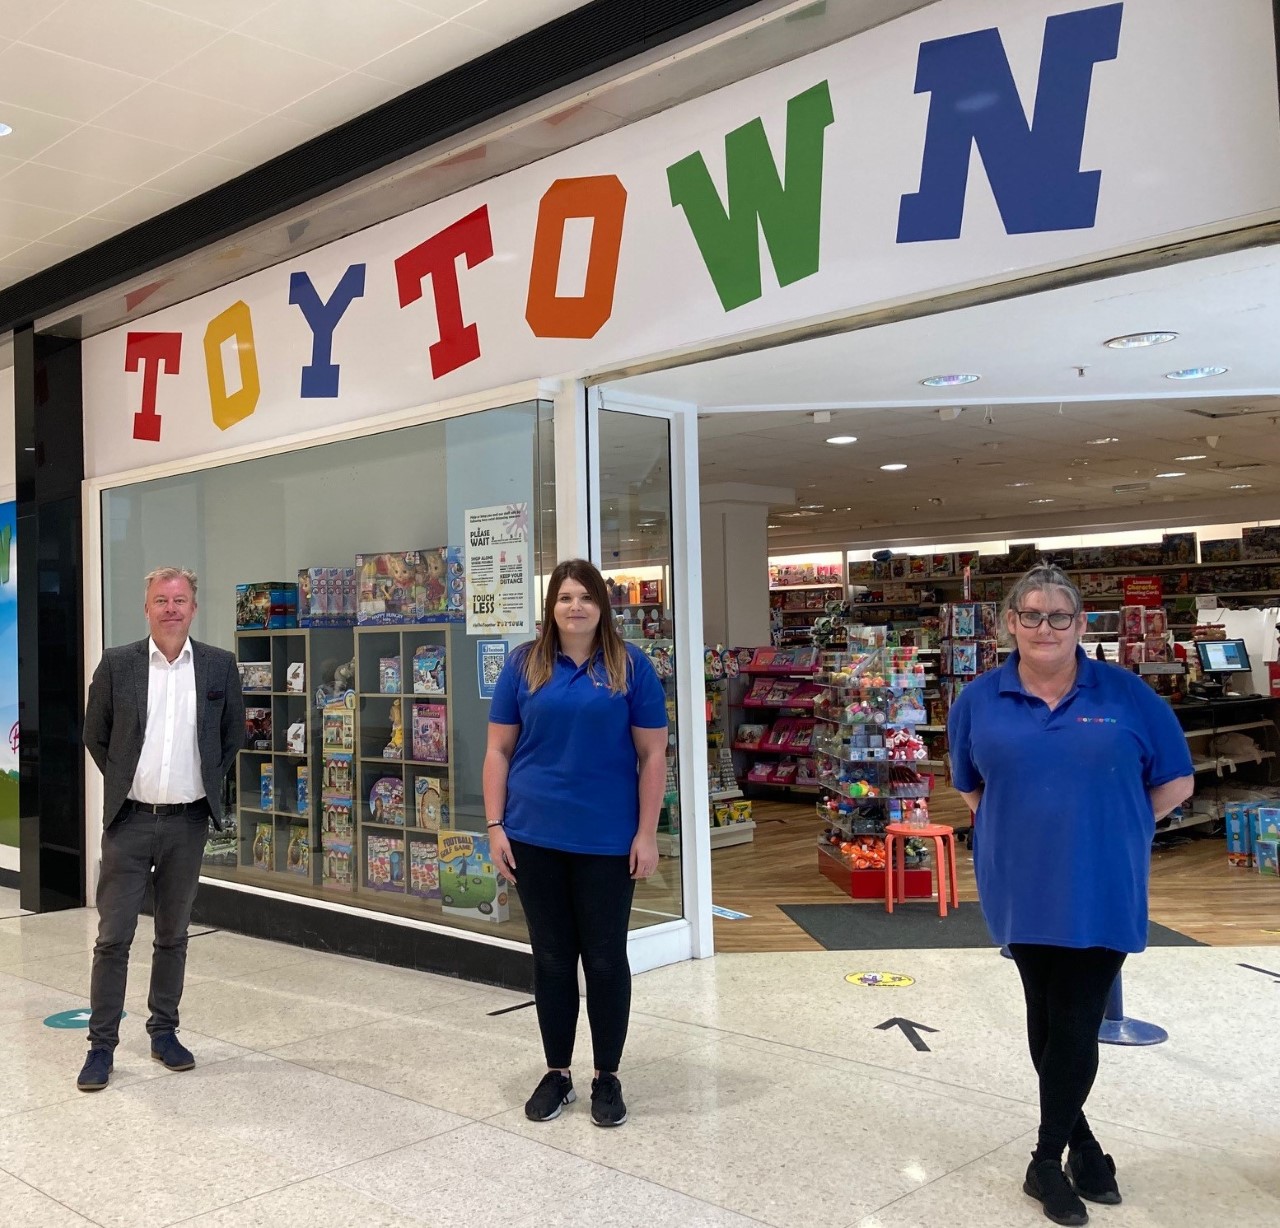 National retailer Toy Town opens store in the Dolphin